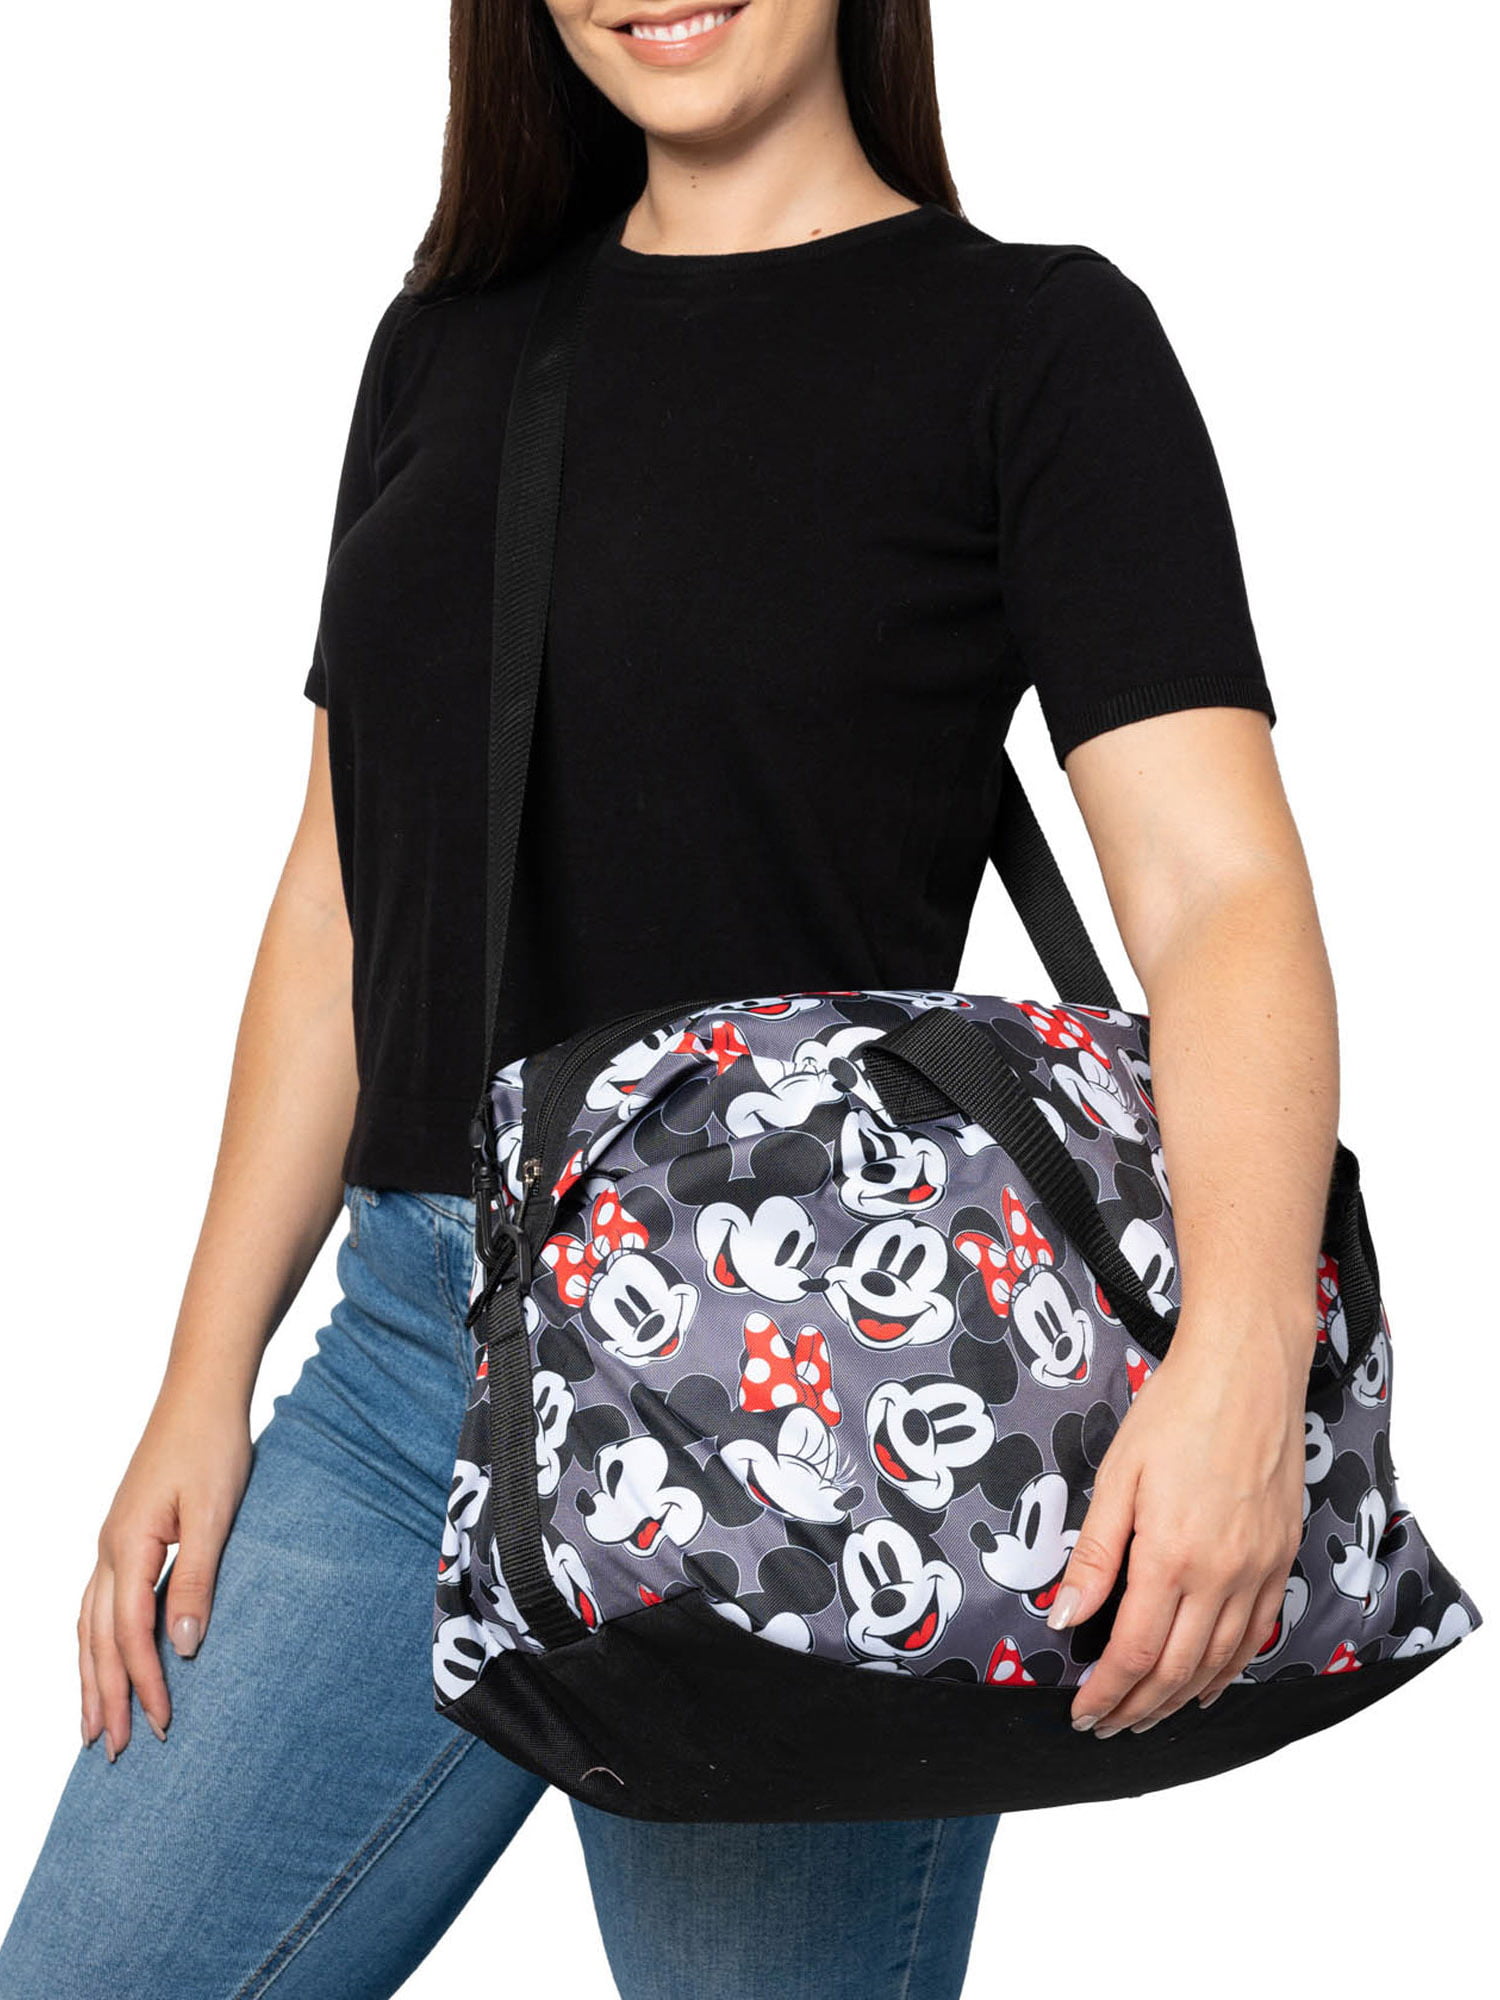 Disney Canvas Travel Duffel Tote Bag for Women Girls Mickey Mouse Luxury  Designer Travel Bag for Carry on Luggage Business Trip